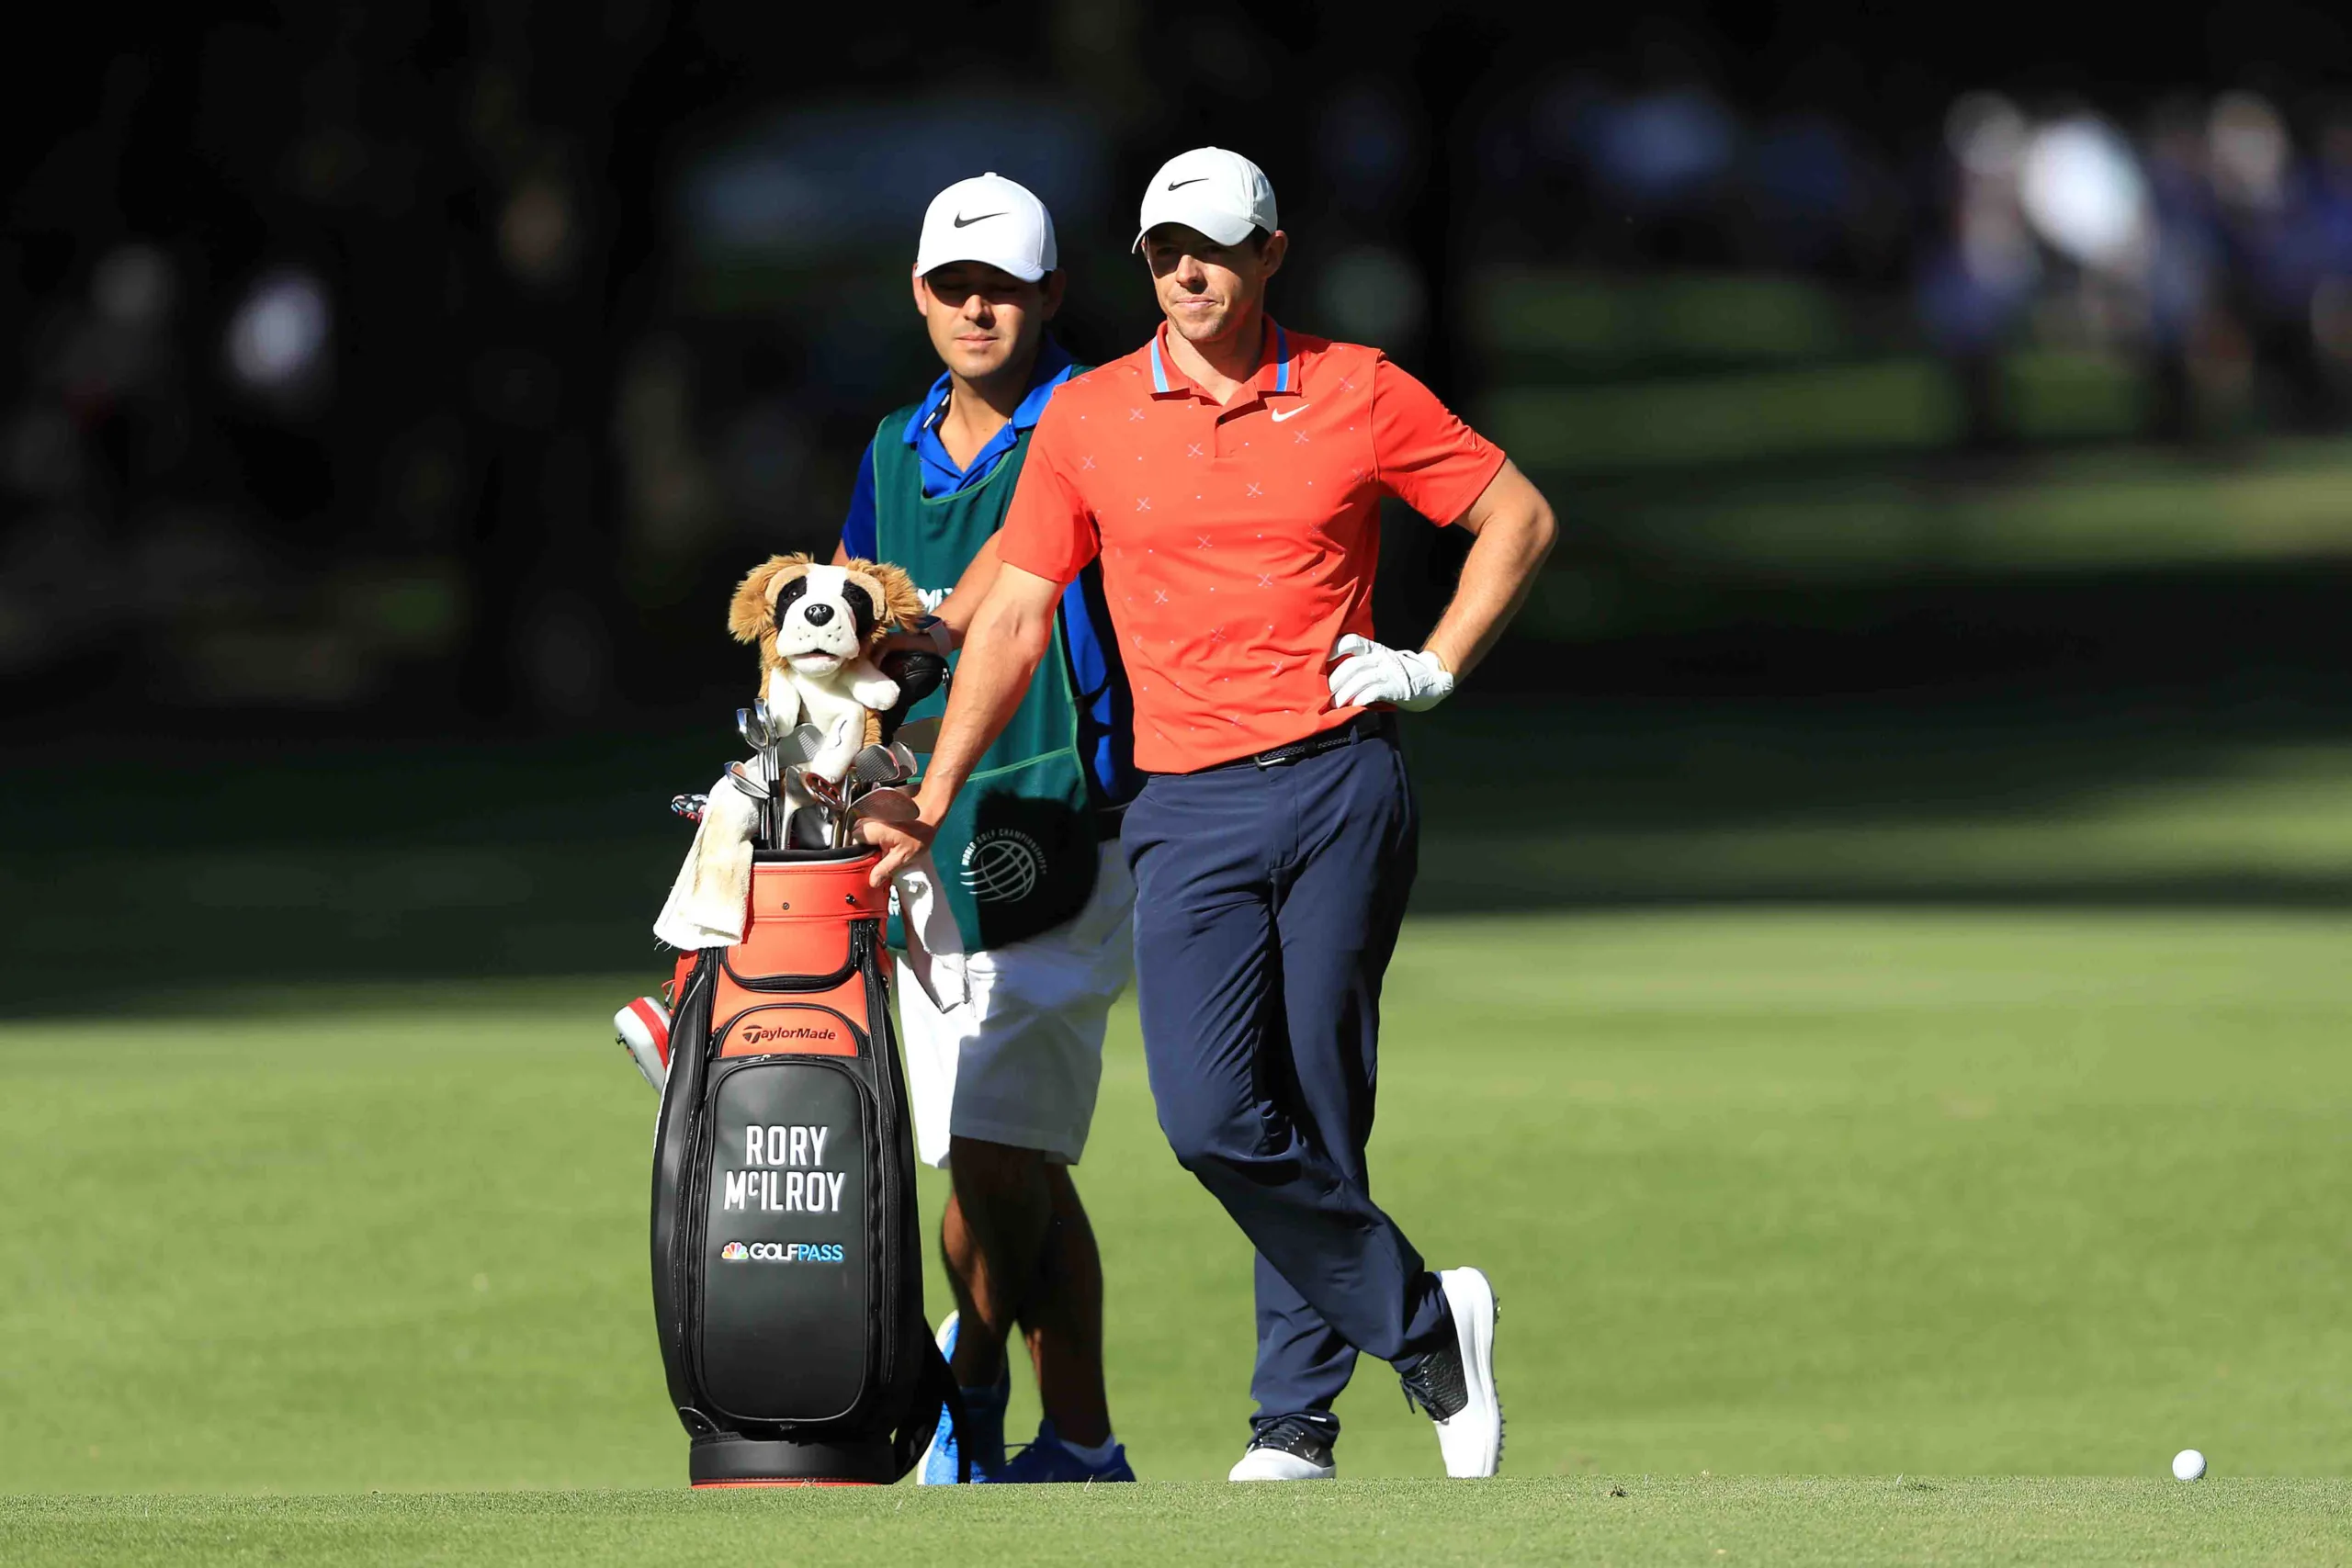 Rory McIlroy on slow play